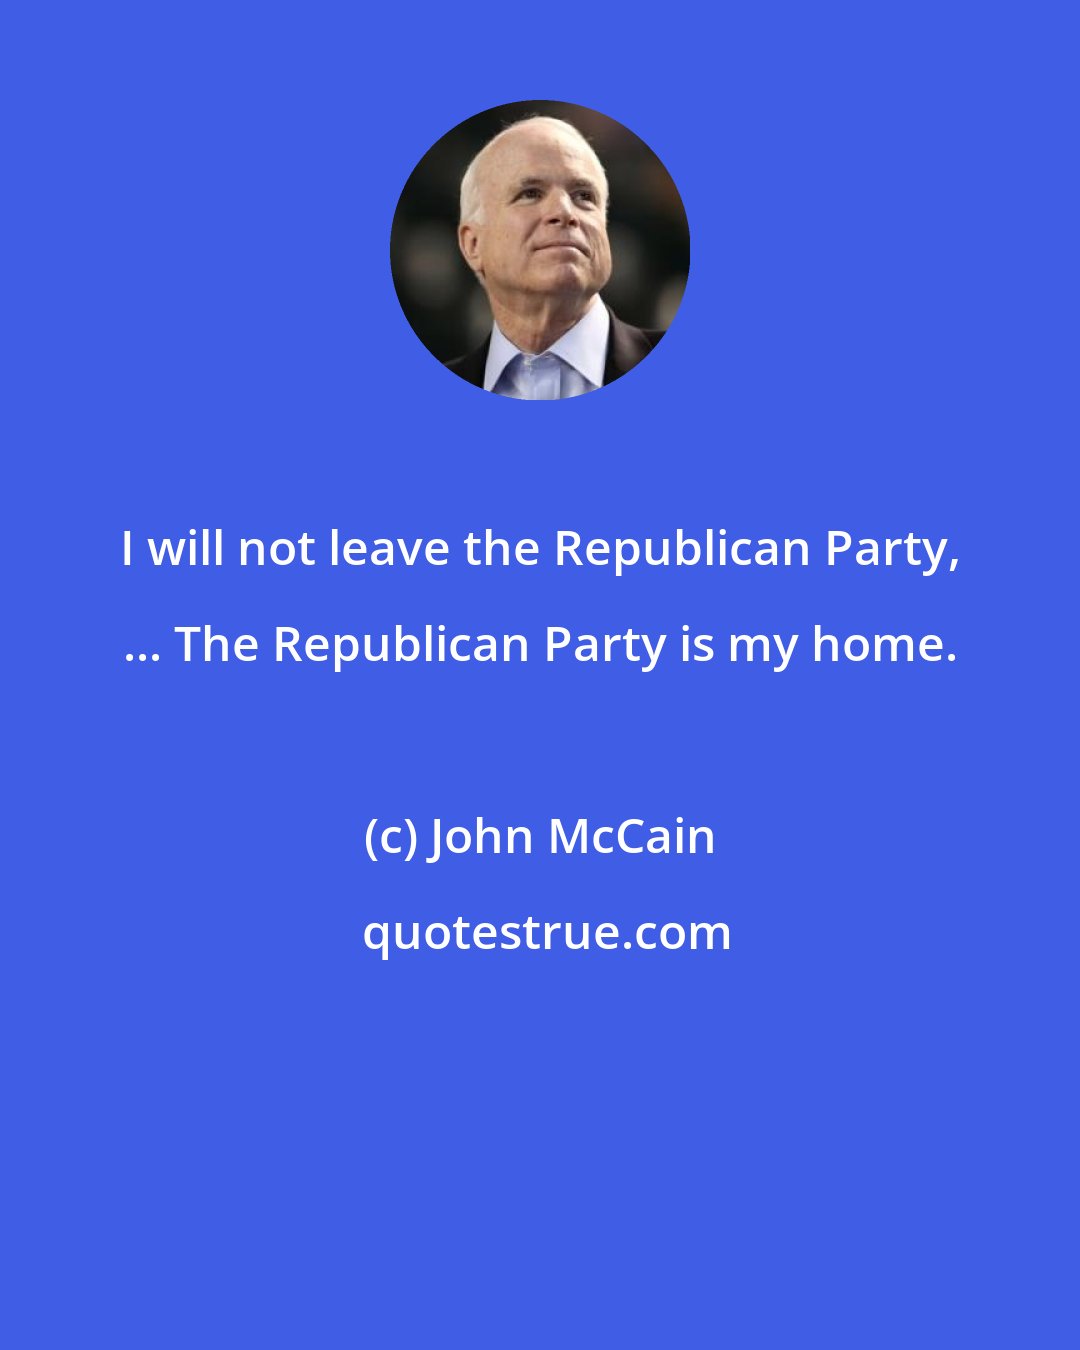 John McCain: I will not leave the Republican Party, ... The Republican Party is my home.